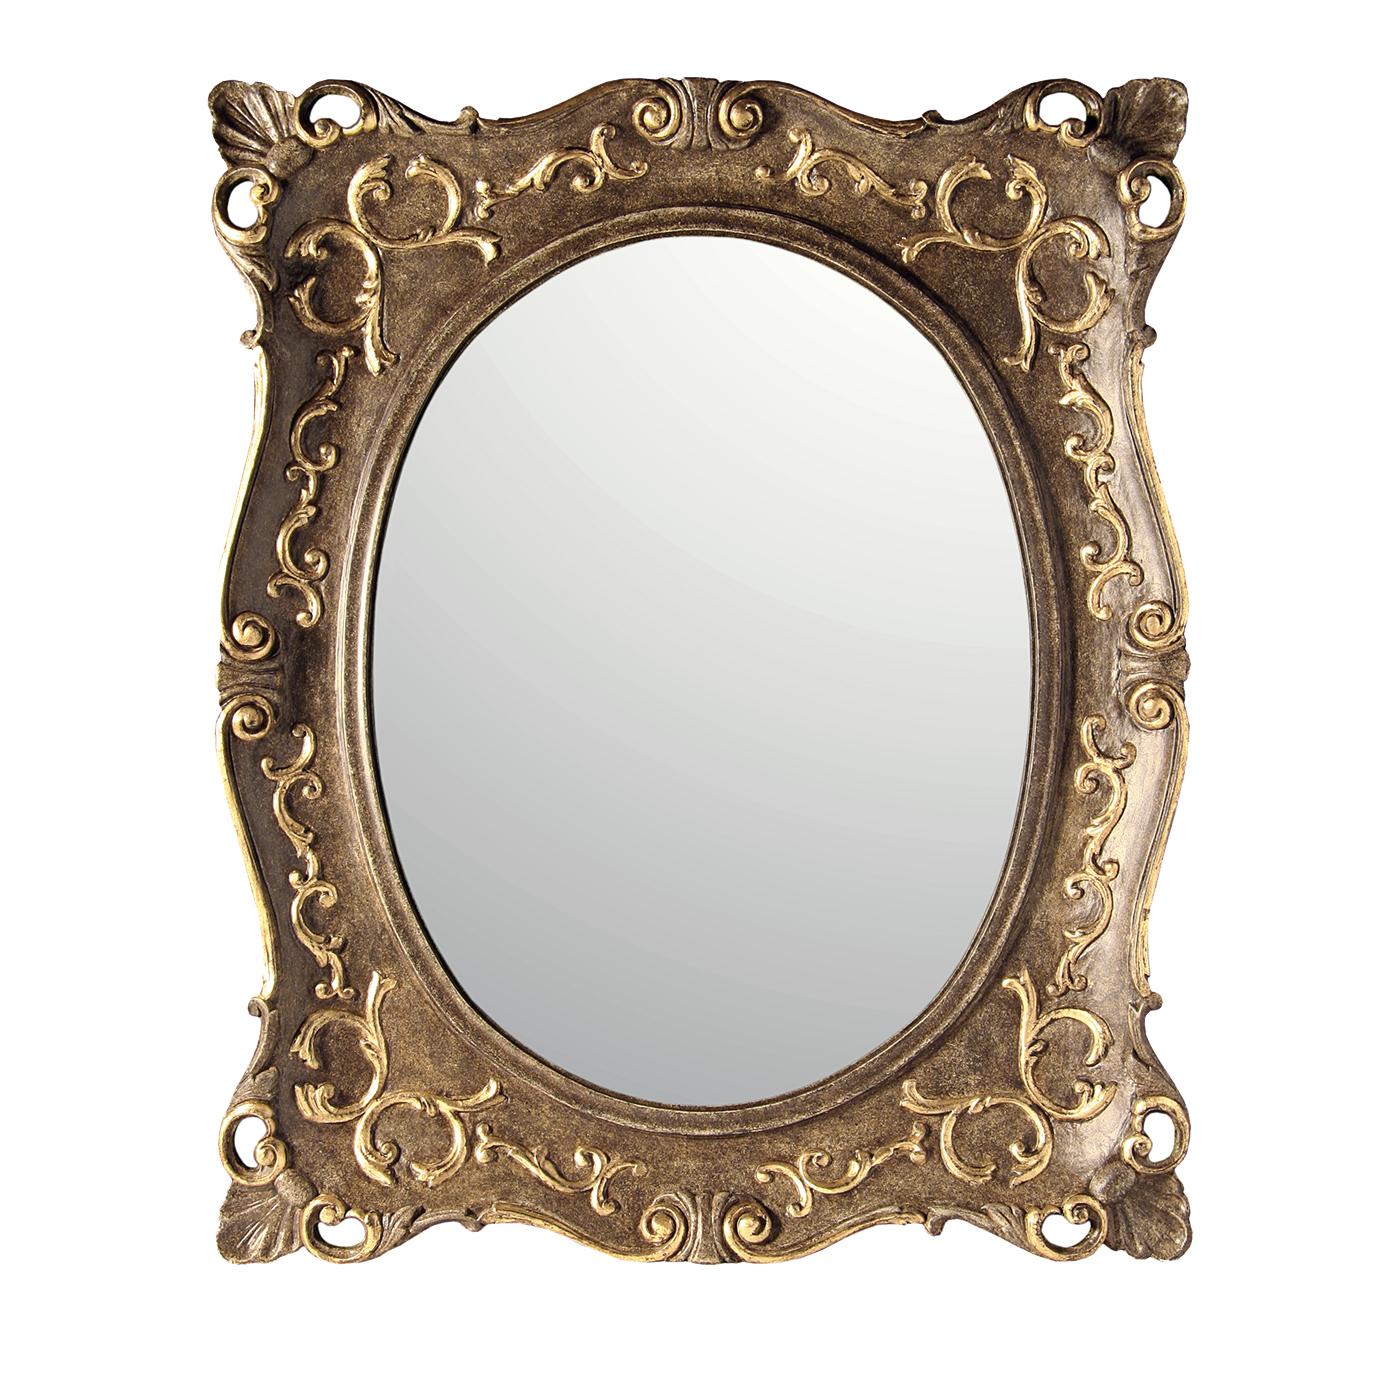 An exquisite addition to a Classic decor, this oval mirror is enclosed in a rectangular frame with gentle curves. Adorned with hand carved decorations both around its profile and on the front. The solid wood of the frame is coated with precious gold